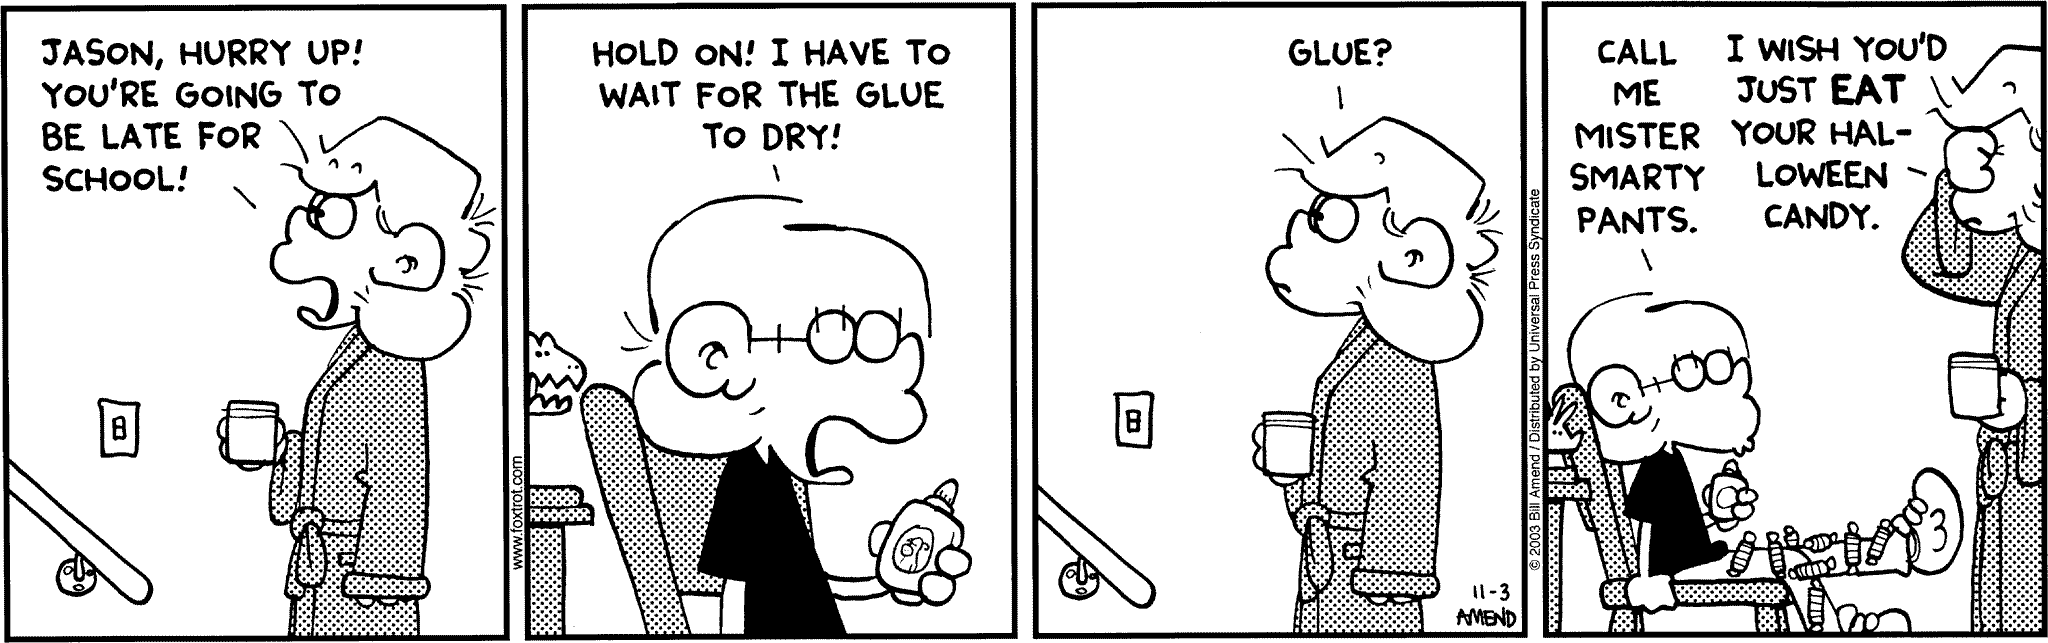 Halloween Comics - FoxTrot comic strip by Bill Amend - Published November 3, 2003 - Andy: Jason, hurry up! You're going to be late for school! Jason: Hold on! I have to wait for the glue to dry! Andy: Glue? Jason: Call me Mister Smarty Pants. Jason: I wish you'd just eat your Halloween candy.